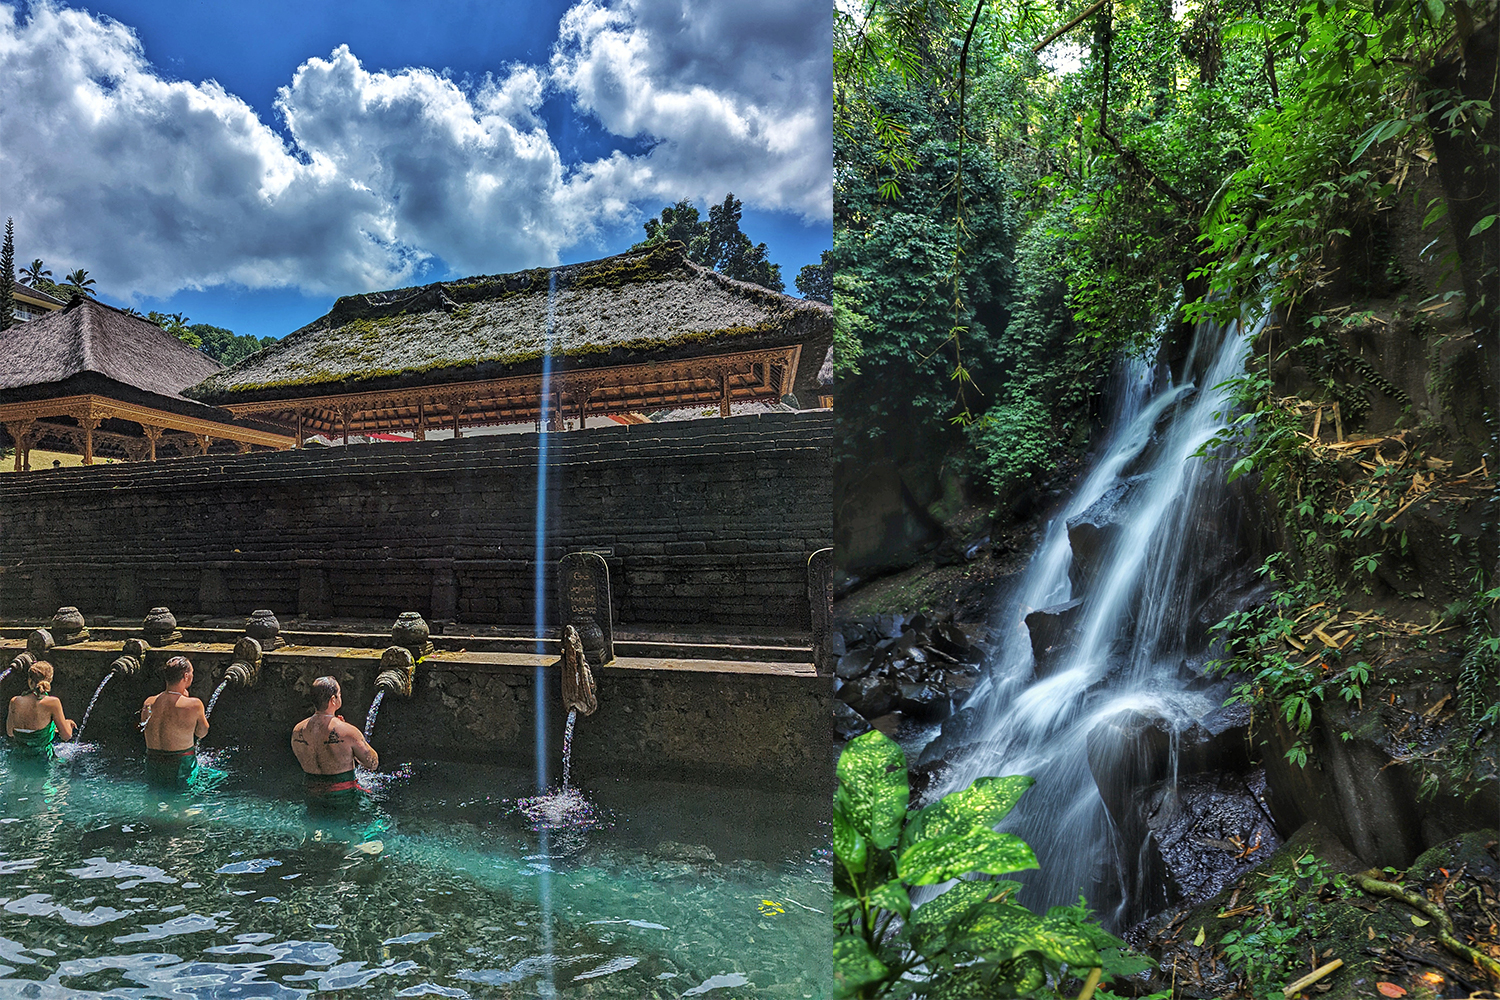 A water purification ritual at a temple in Bali on the left, on the right a waterfall on the island